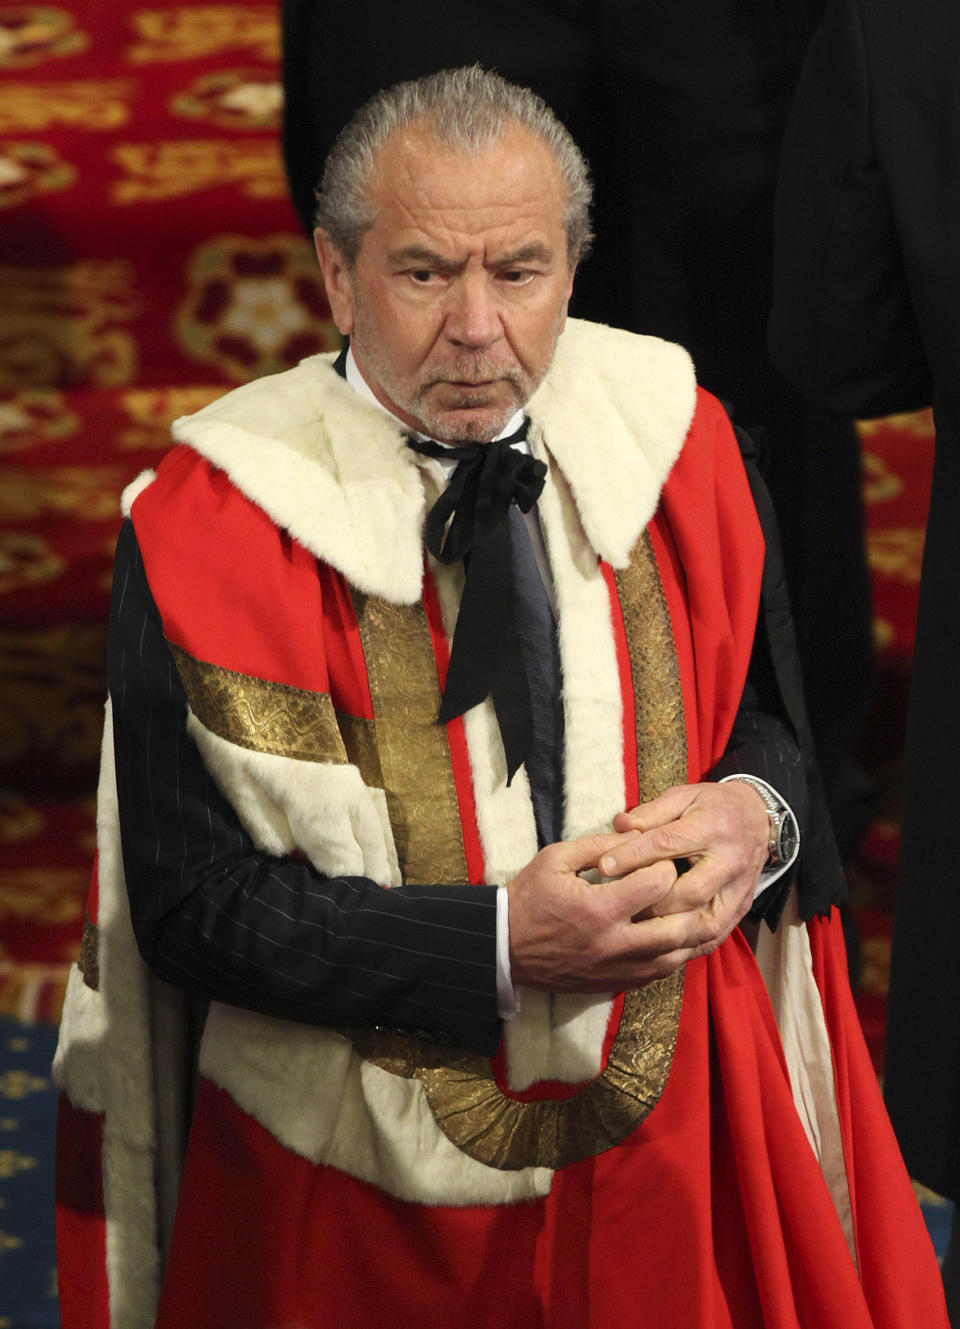 Lord Alan Sugar in the House of Lords chamber during the State Opening of Parliament.